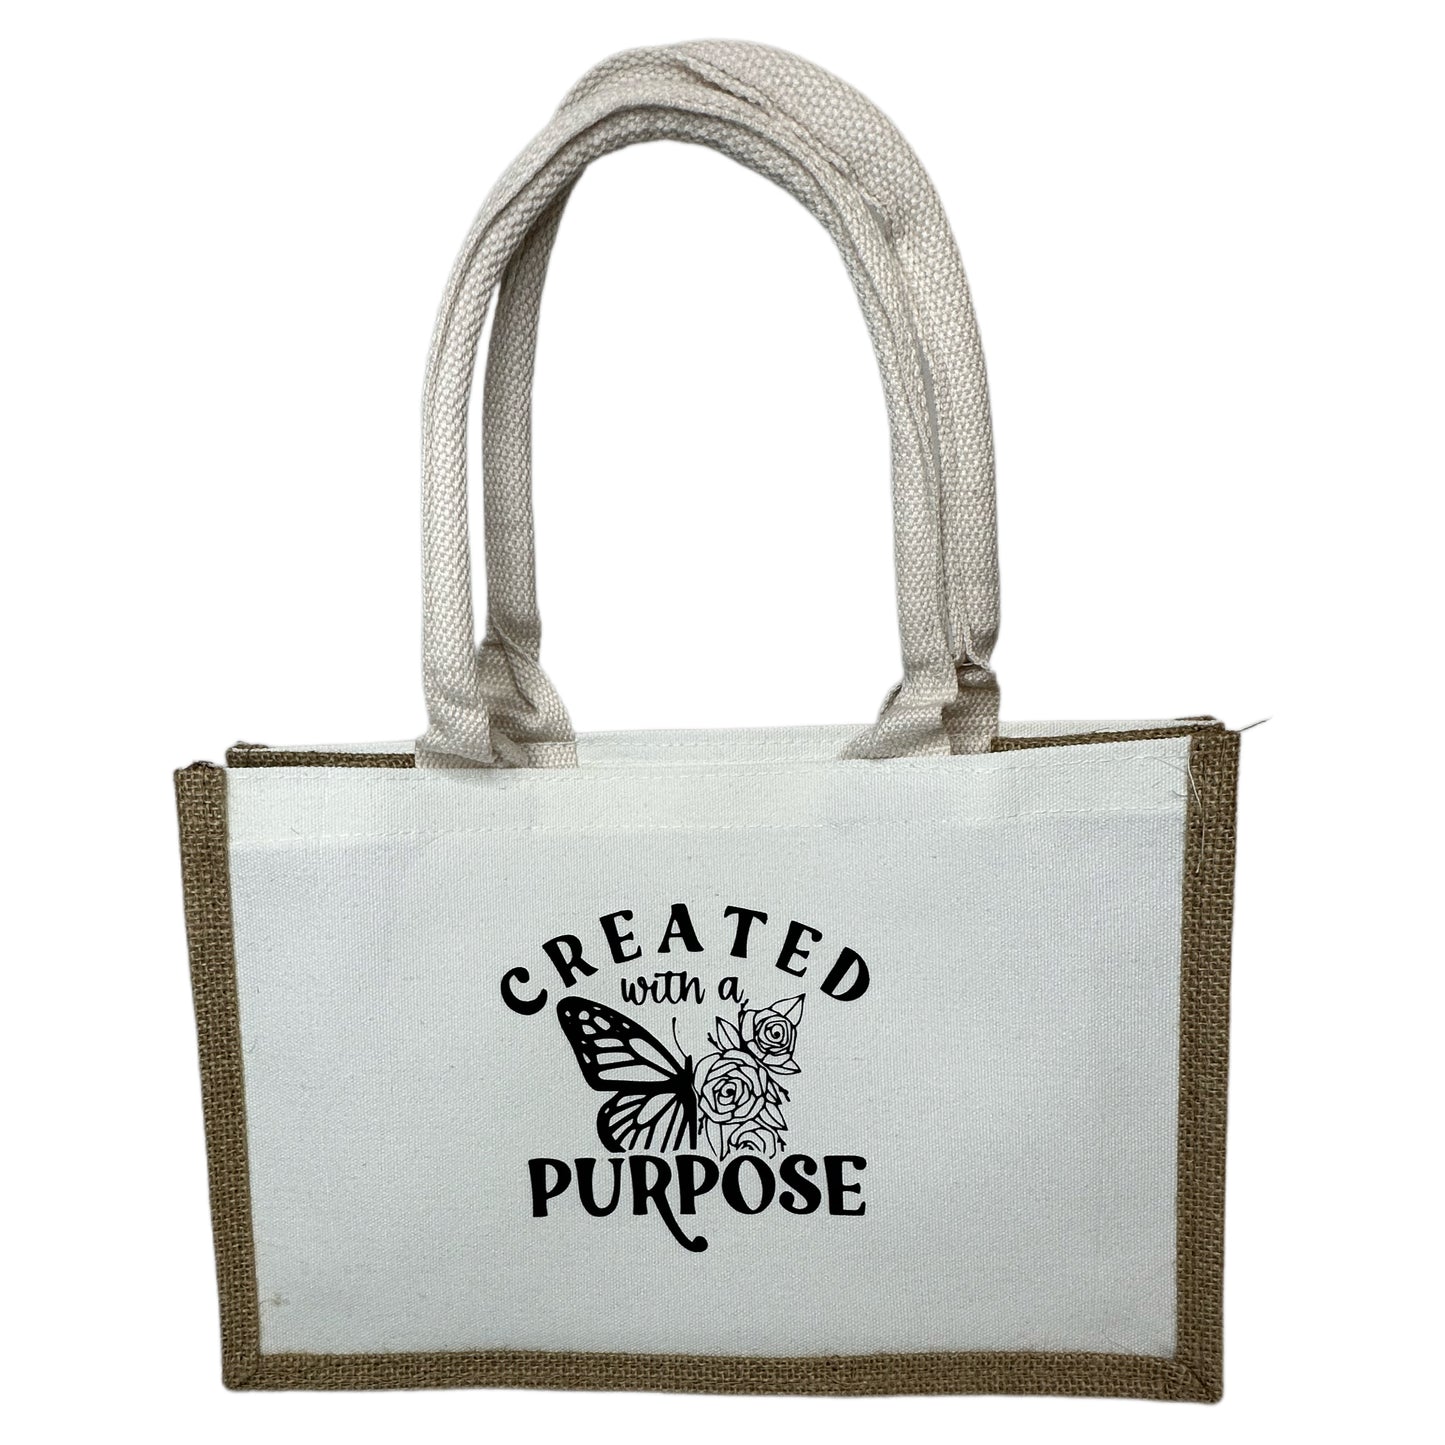 Created with a purpose burlap tote bag